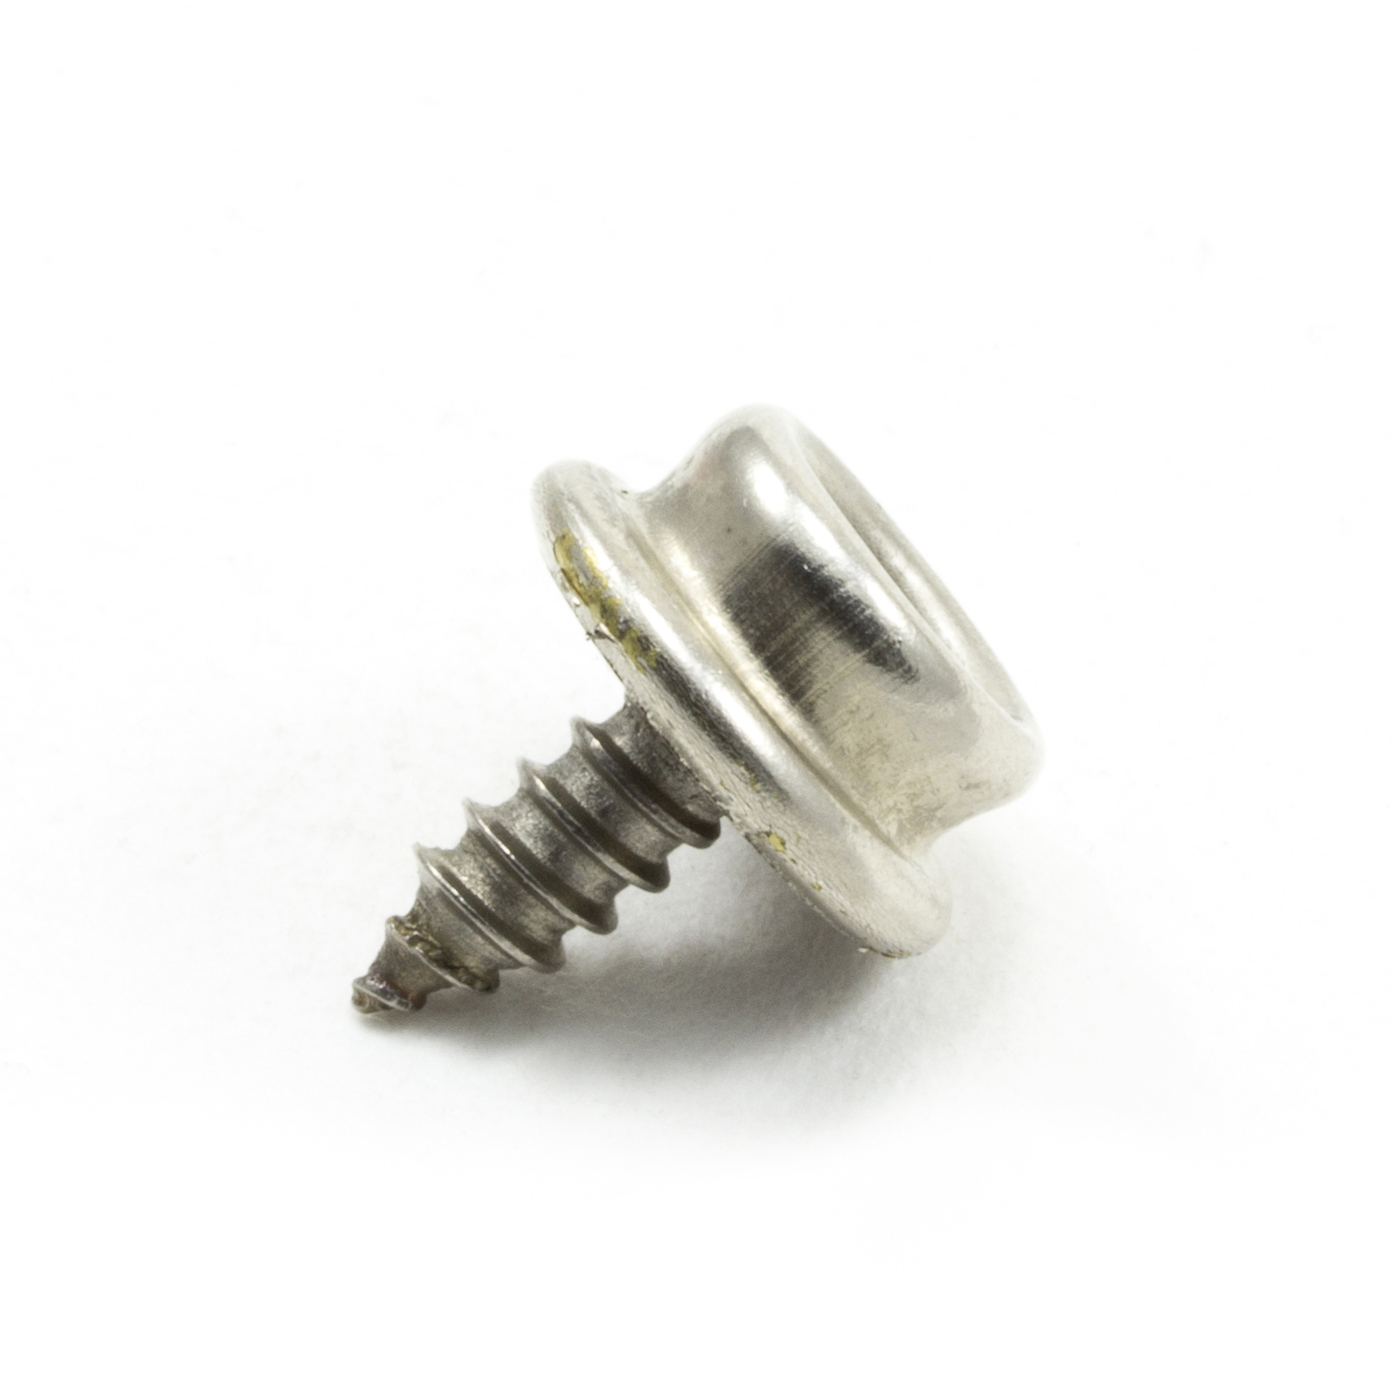 DOT Durable Screw Stud 93-X8-109344-1A 3/8" 10 Nickel Plated Brass / Stainless Steel Screw 100-pk